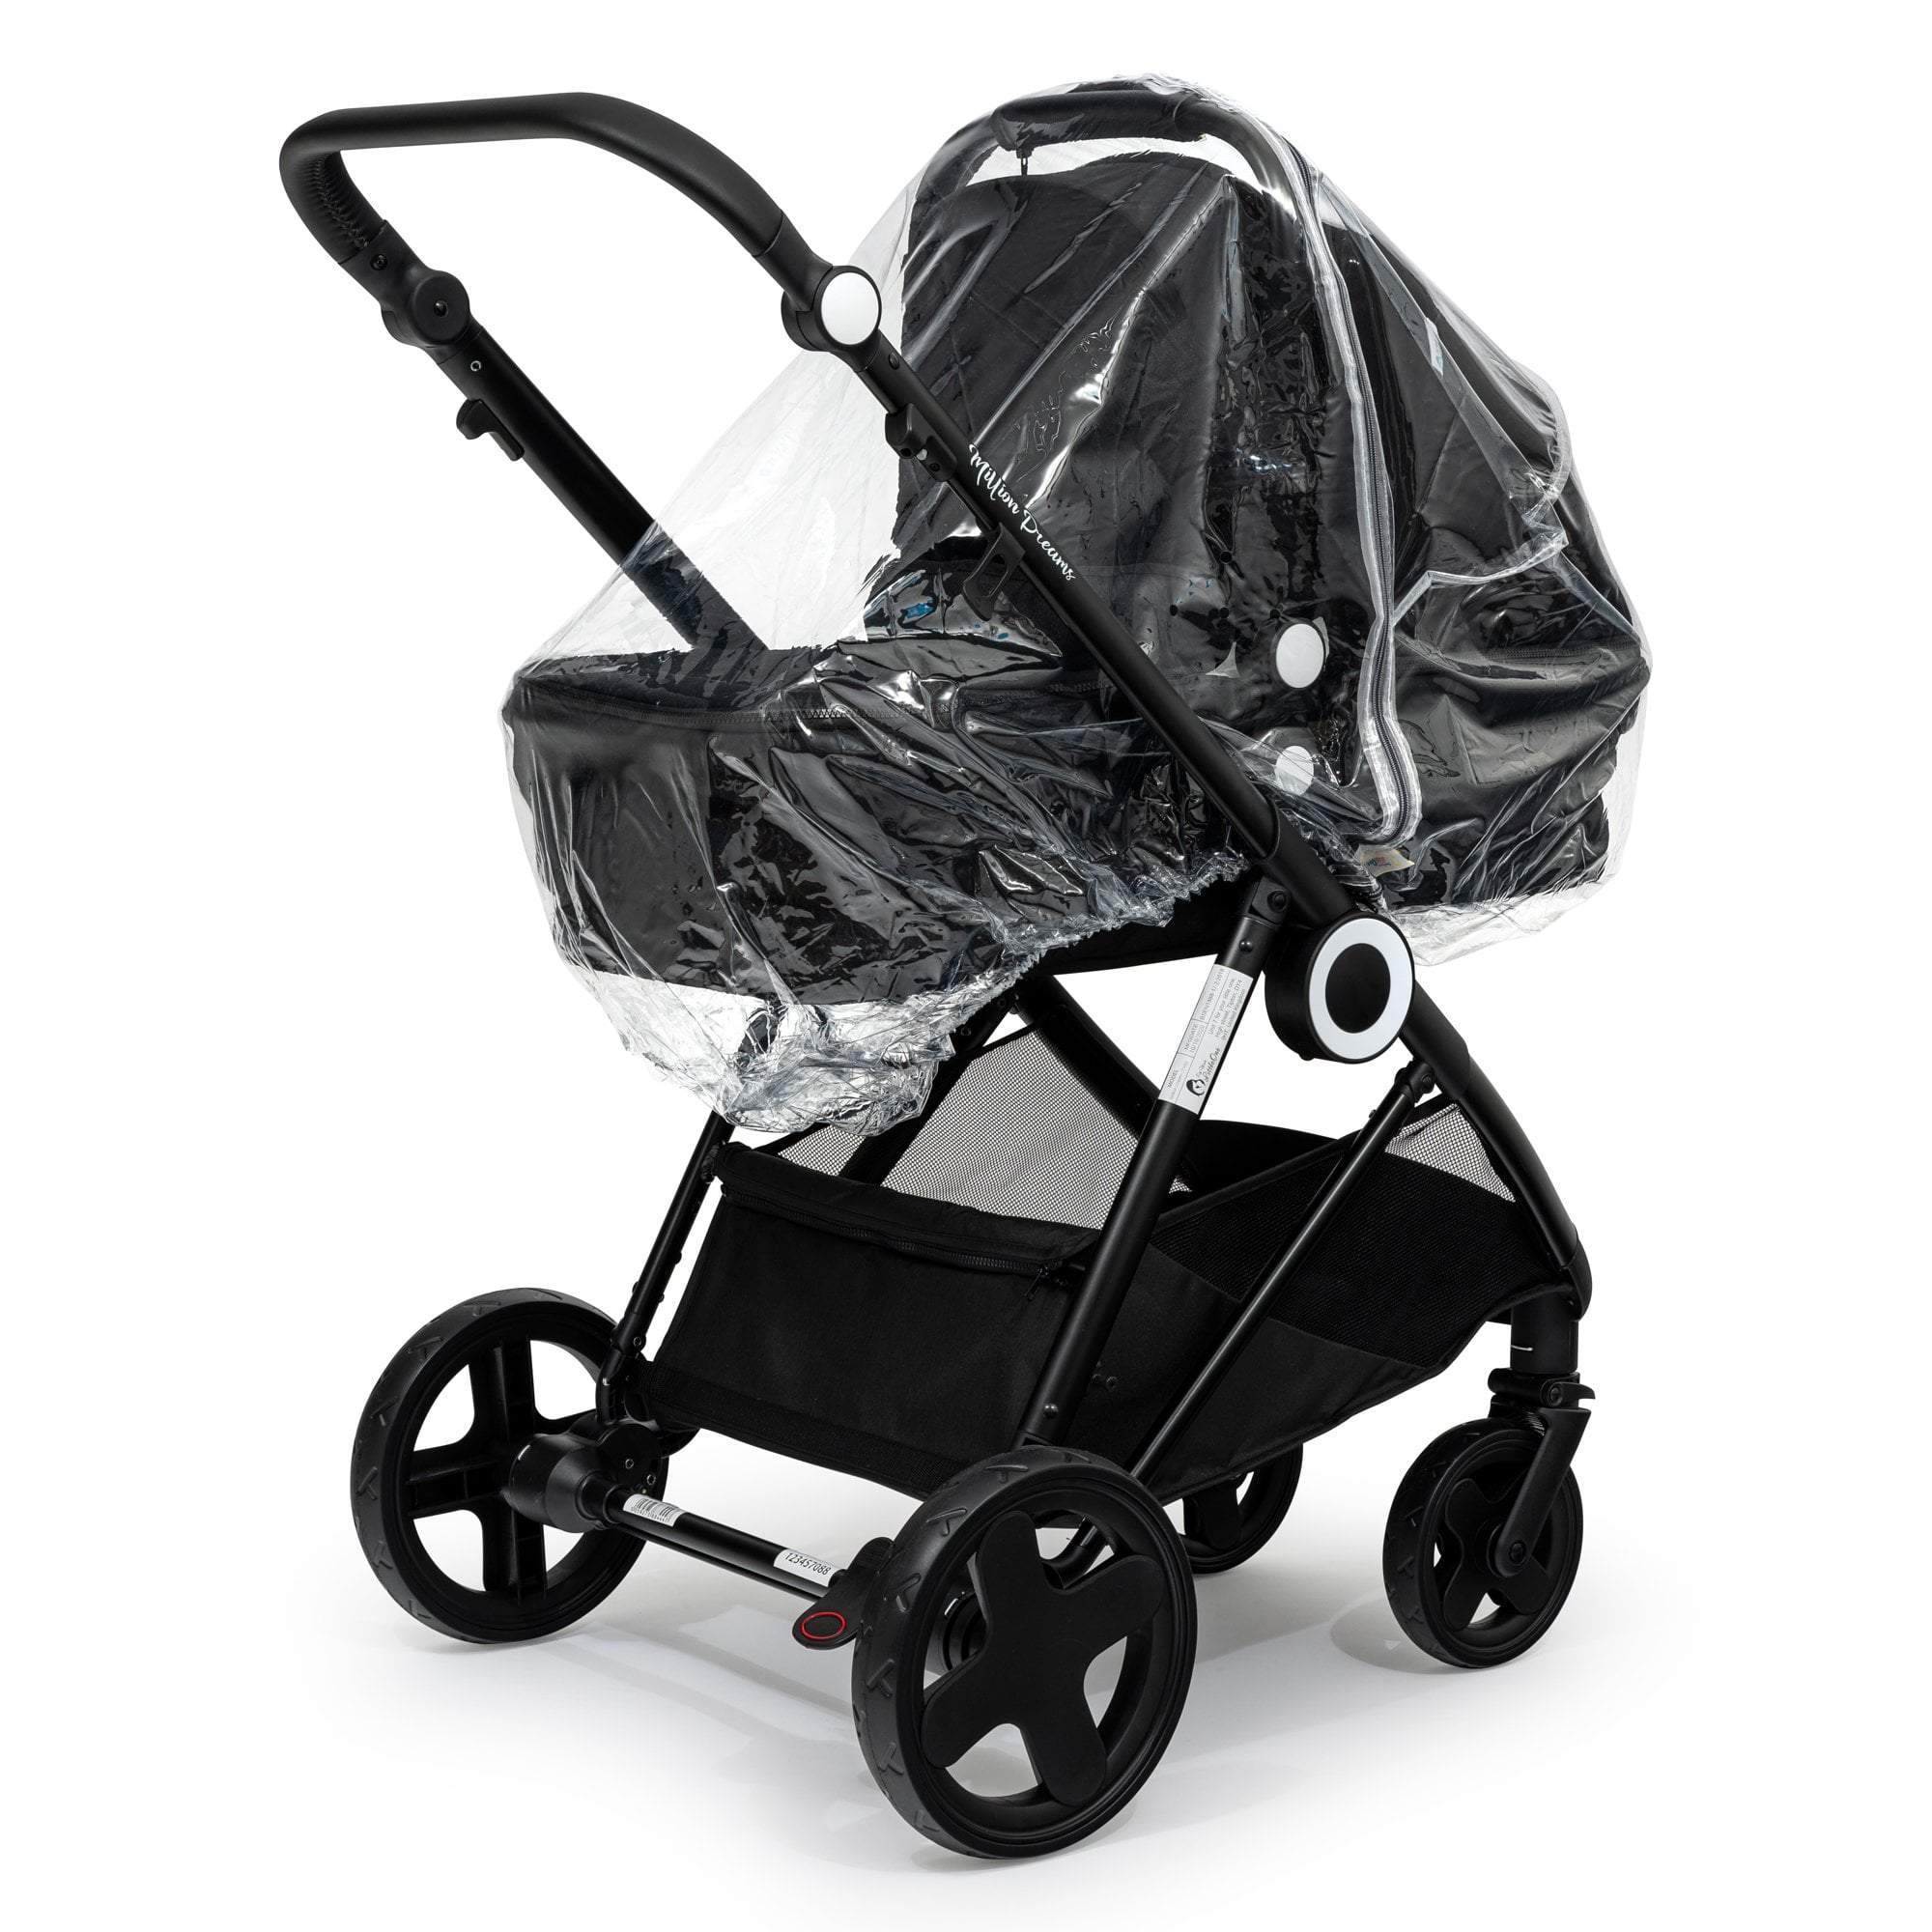 Carrycot Raincover Compatible With Concord - Fits All Models - For Your Little One